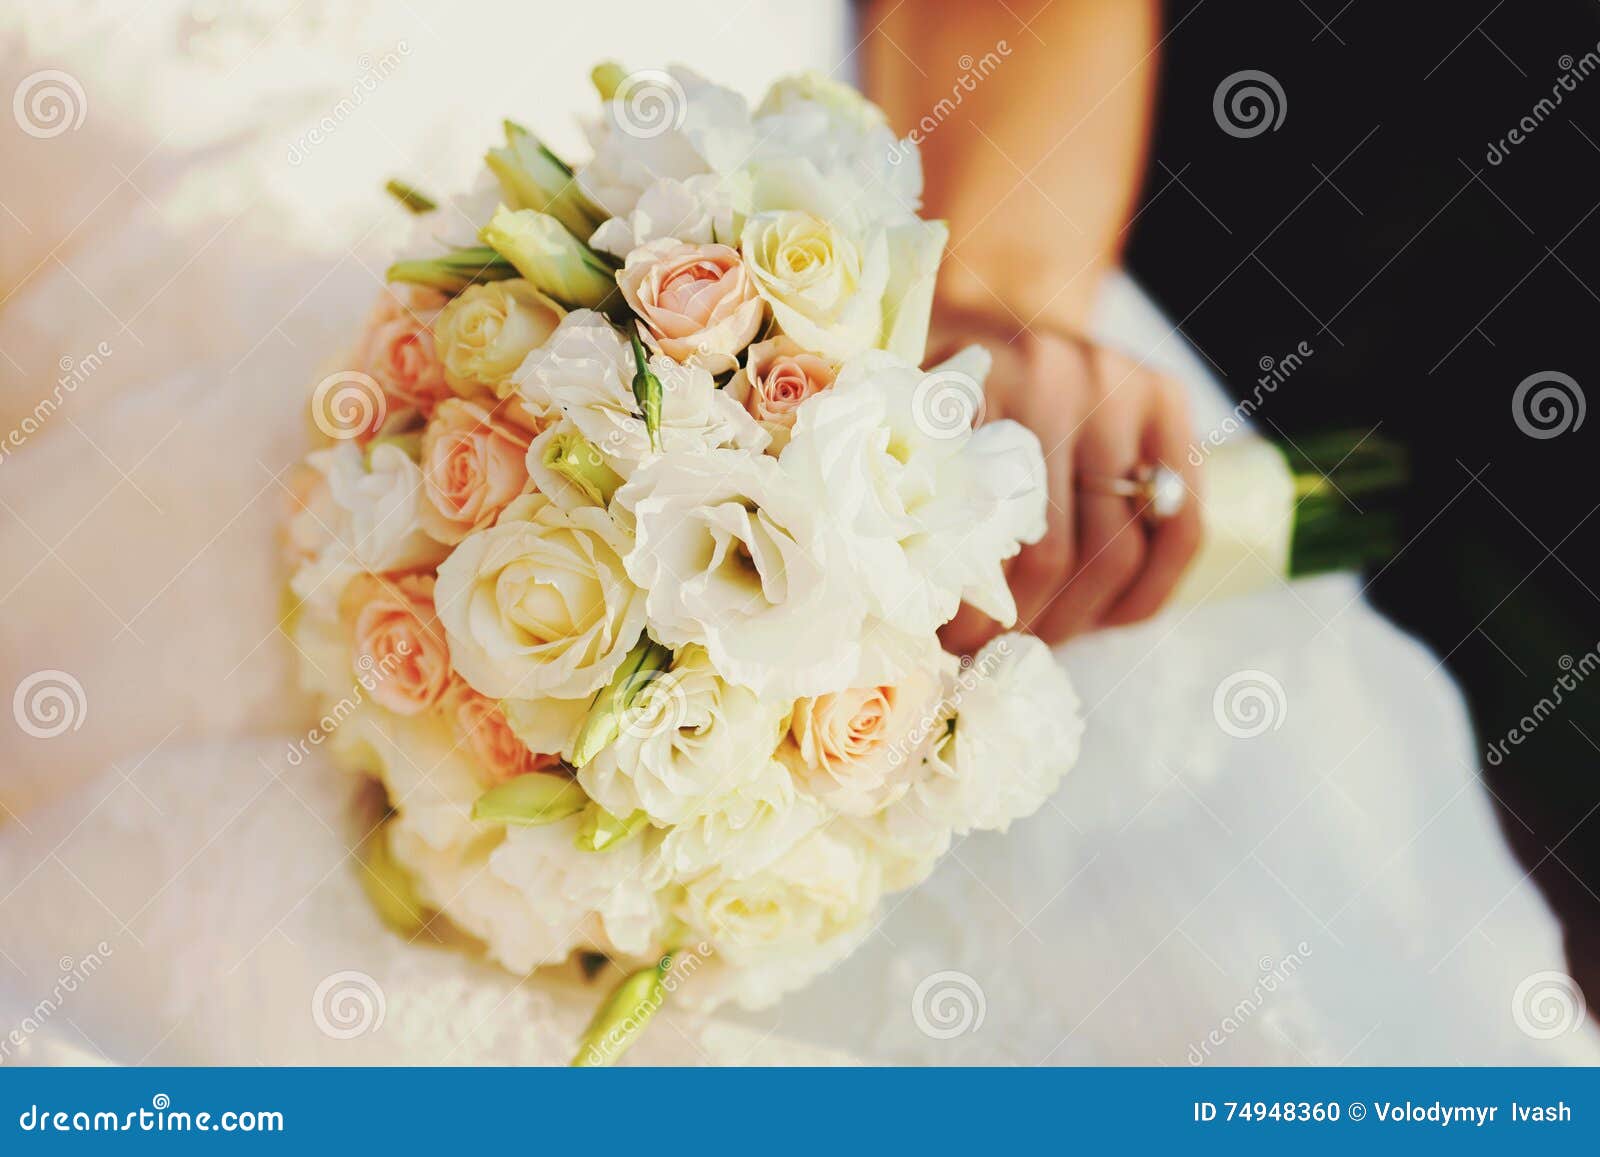 Bride S Hand Holds a Wedding Bouquet of White and Creamy Roses Stock ...